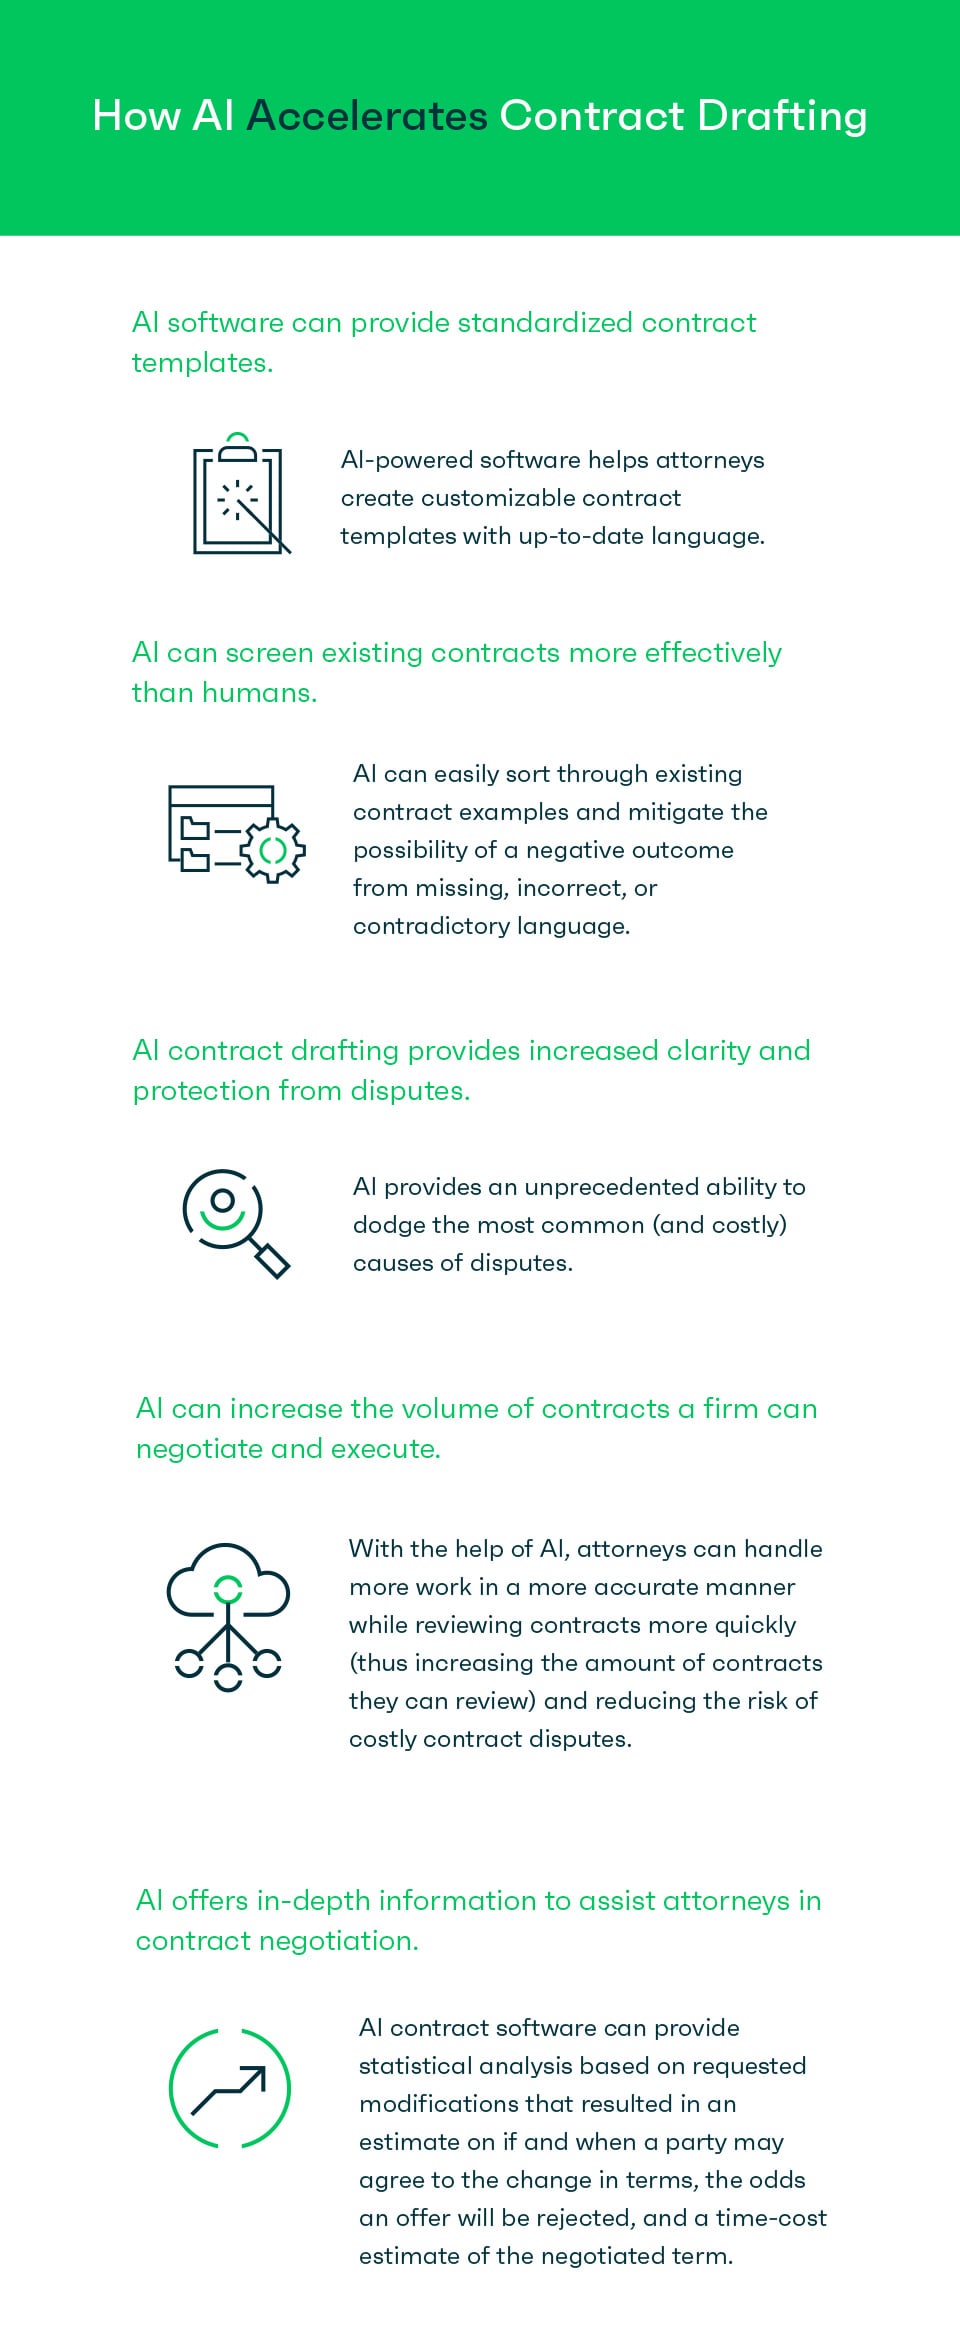 How AI accelerates contract drafting - infographic